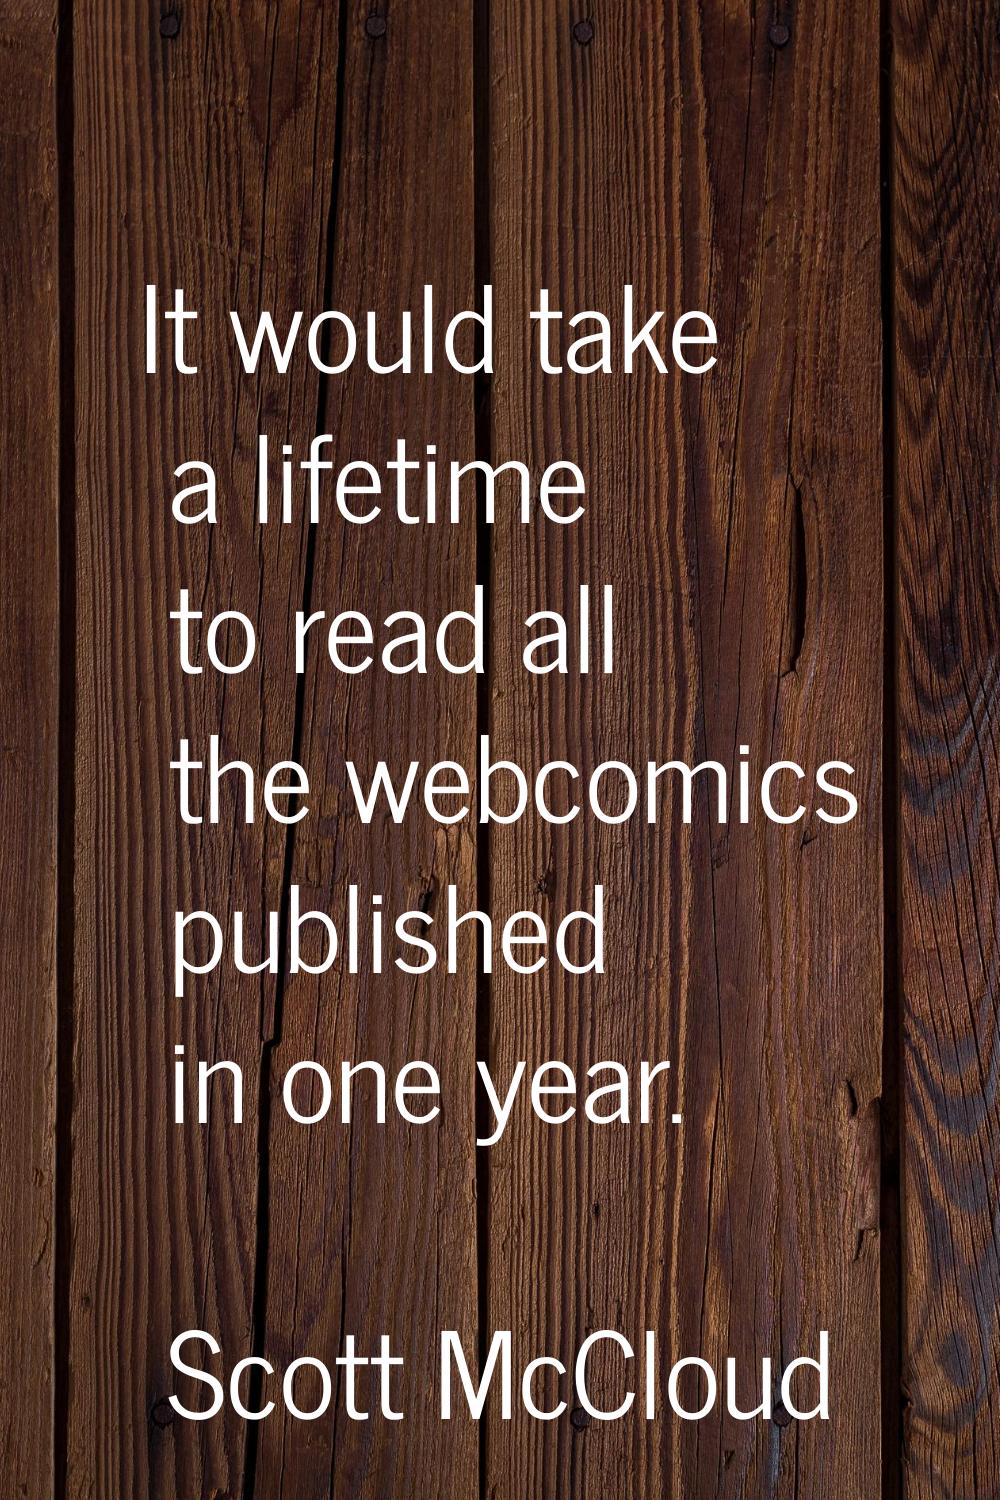 It would take a lifetime to read all the webcomics published in one year.